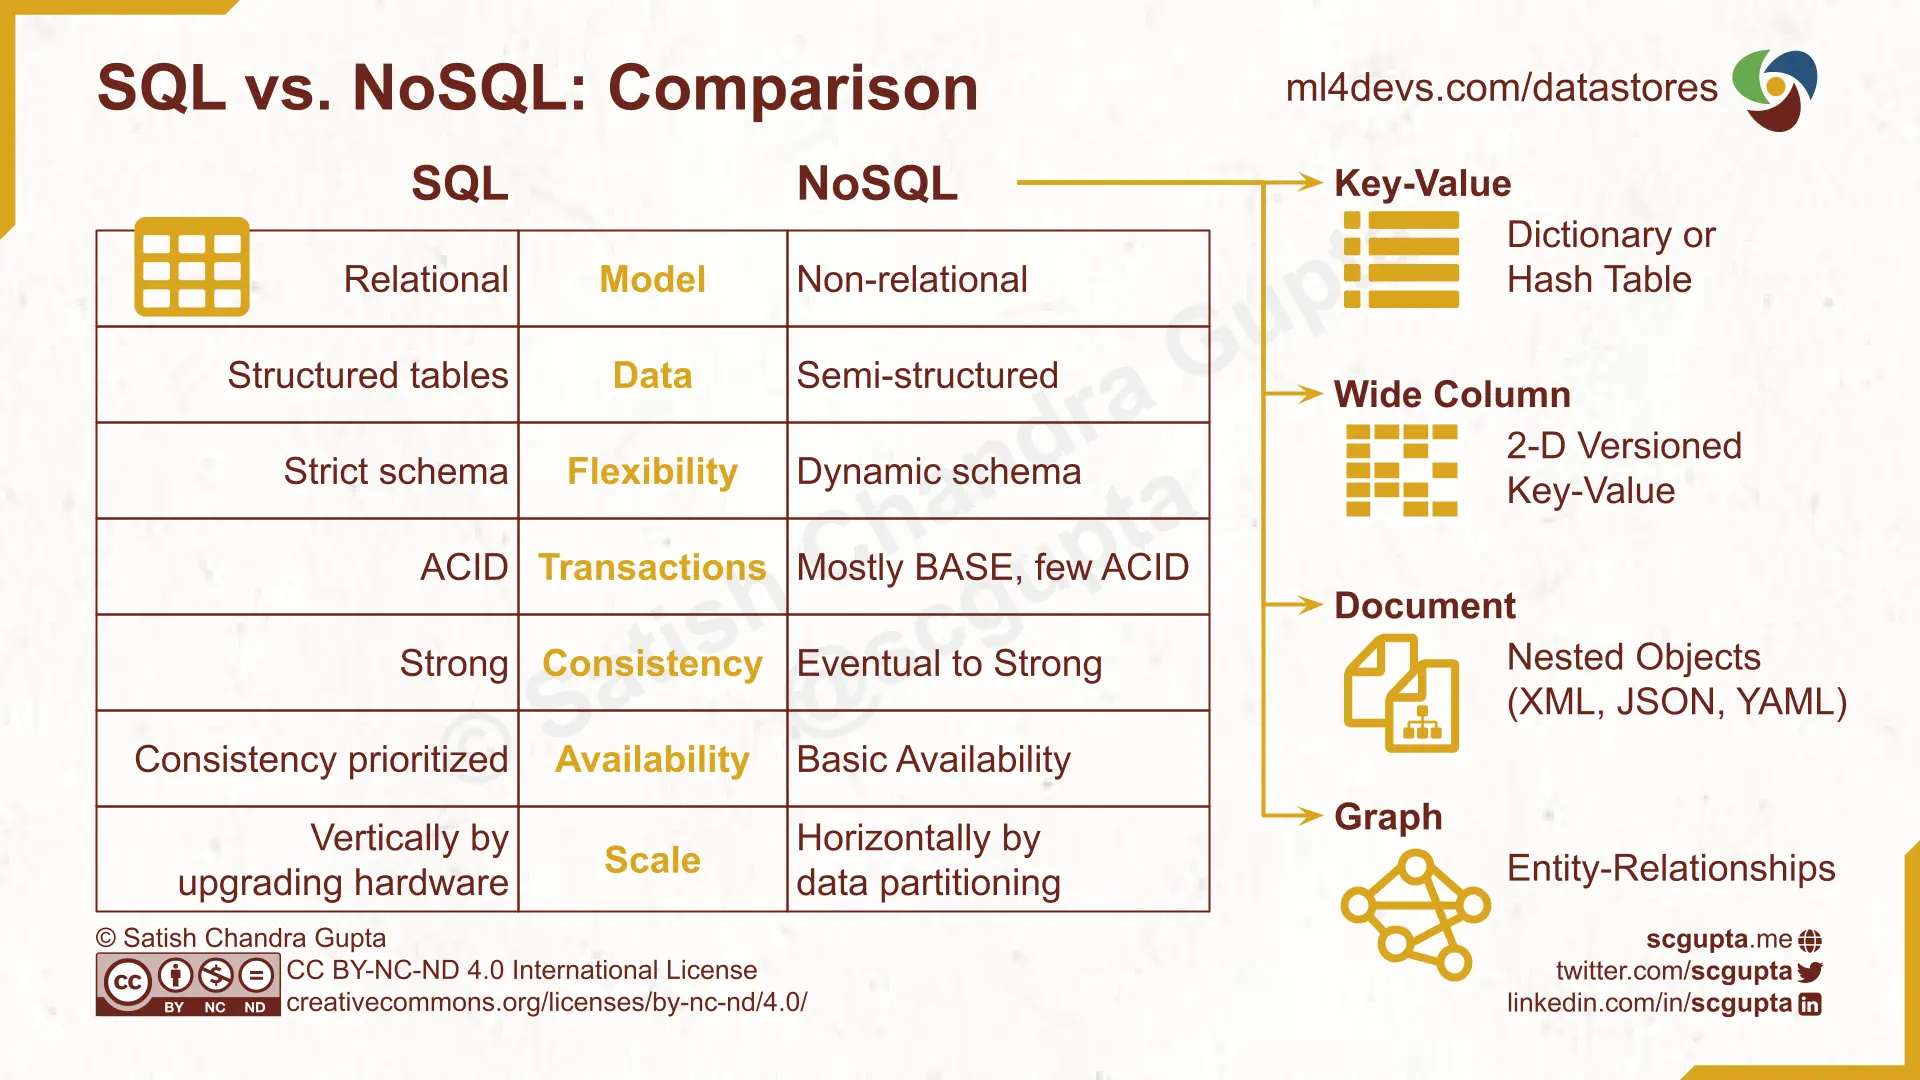 SQL vs. NoSQL: Difference between SQL and NoSQL databases, and when to use NoSQL.